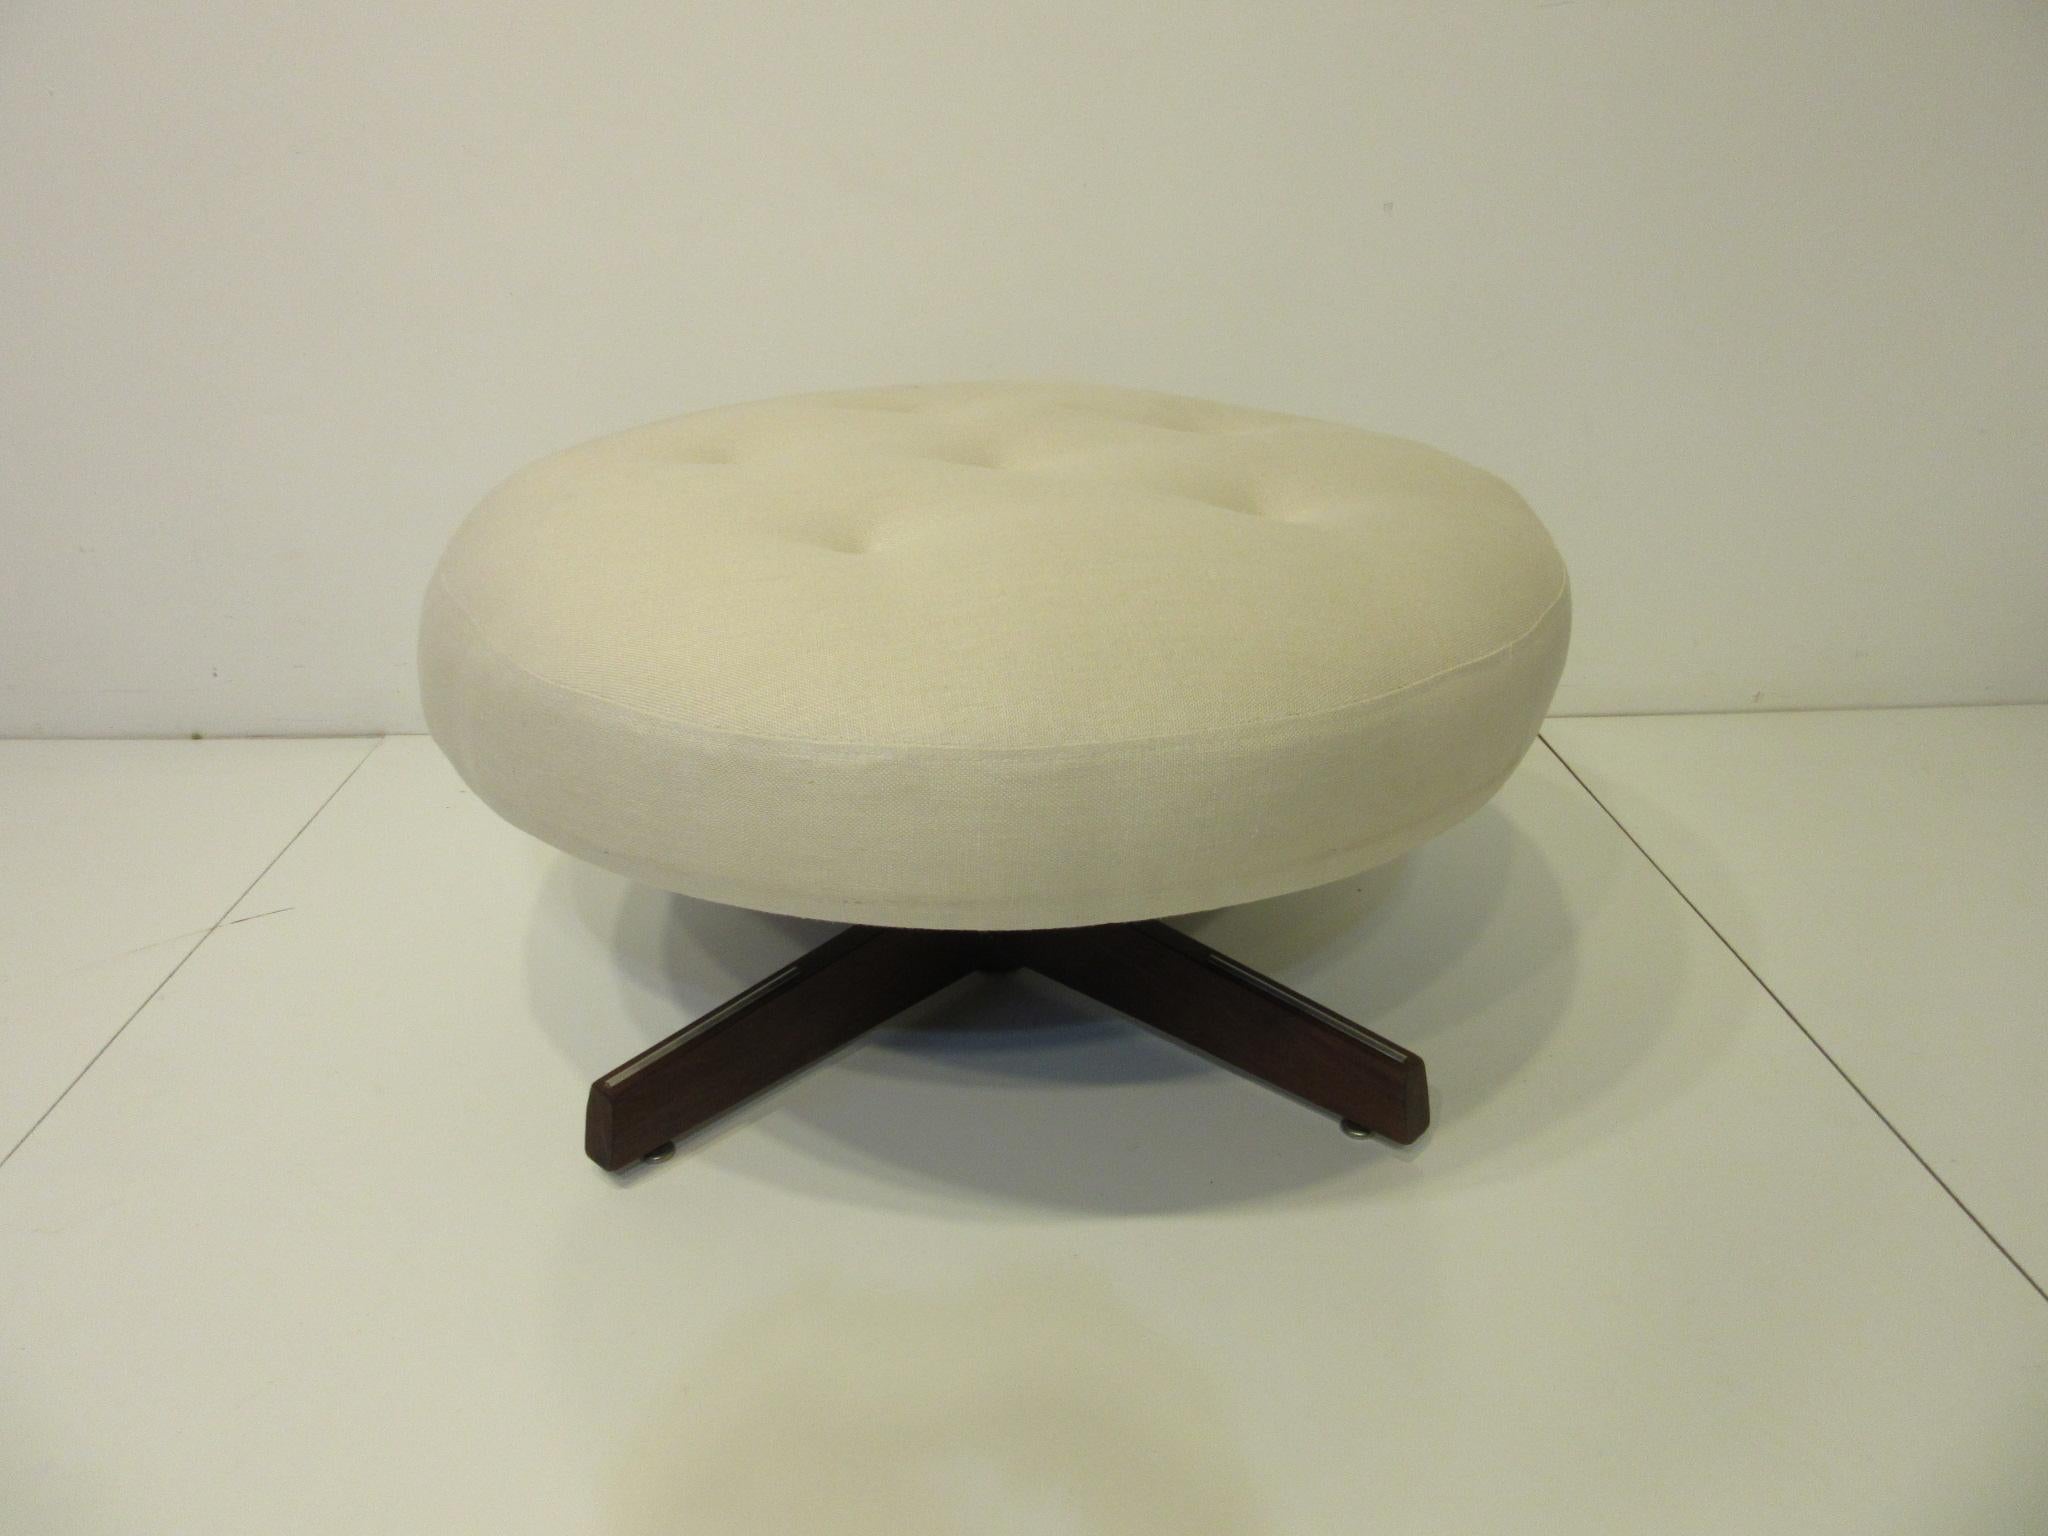 A well crafted upholstered round swiveling ottoman in a cream colored Italian styled linen with button cushion top, walnut four star base detailed with brushed metal strips and having adjustable foot pads. Can be used as extra seating, for a lounge